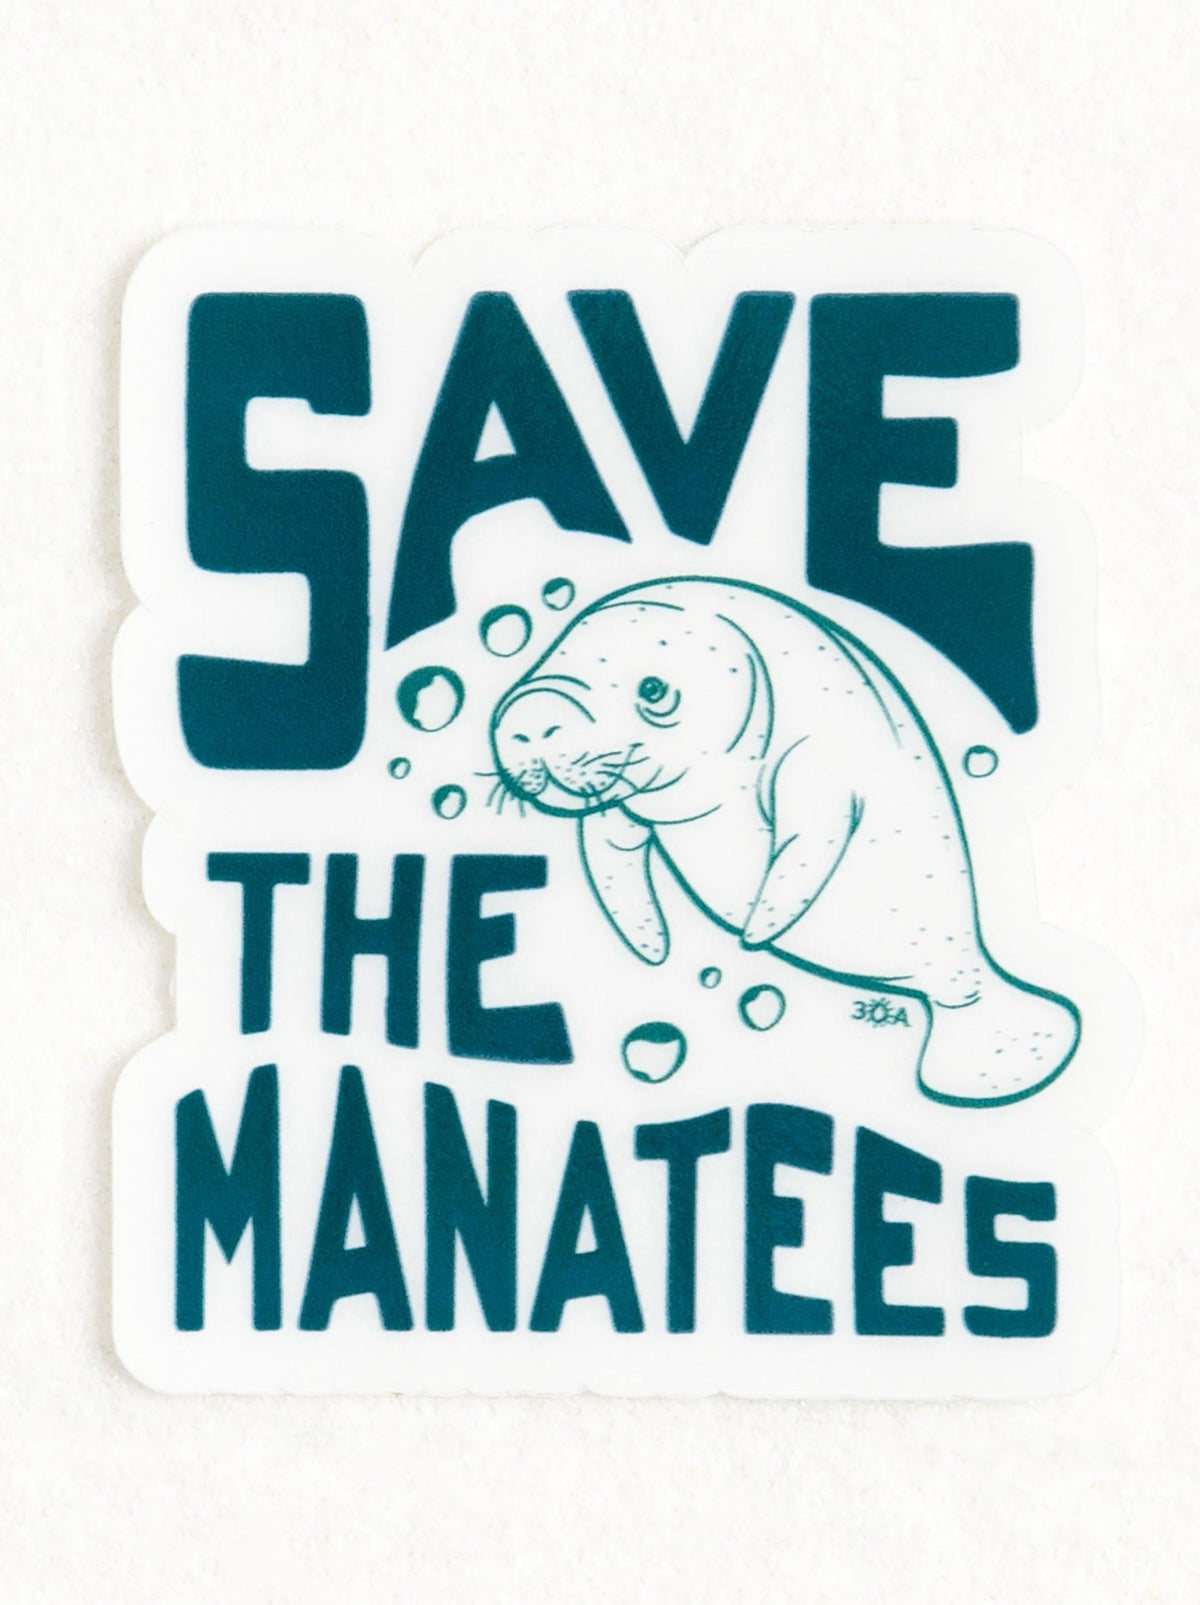 30A Save The Manatees Sticker